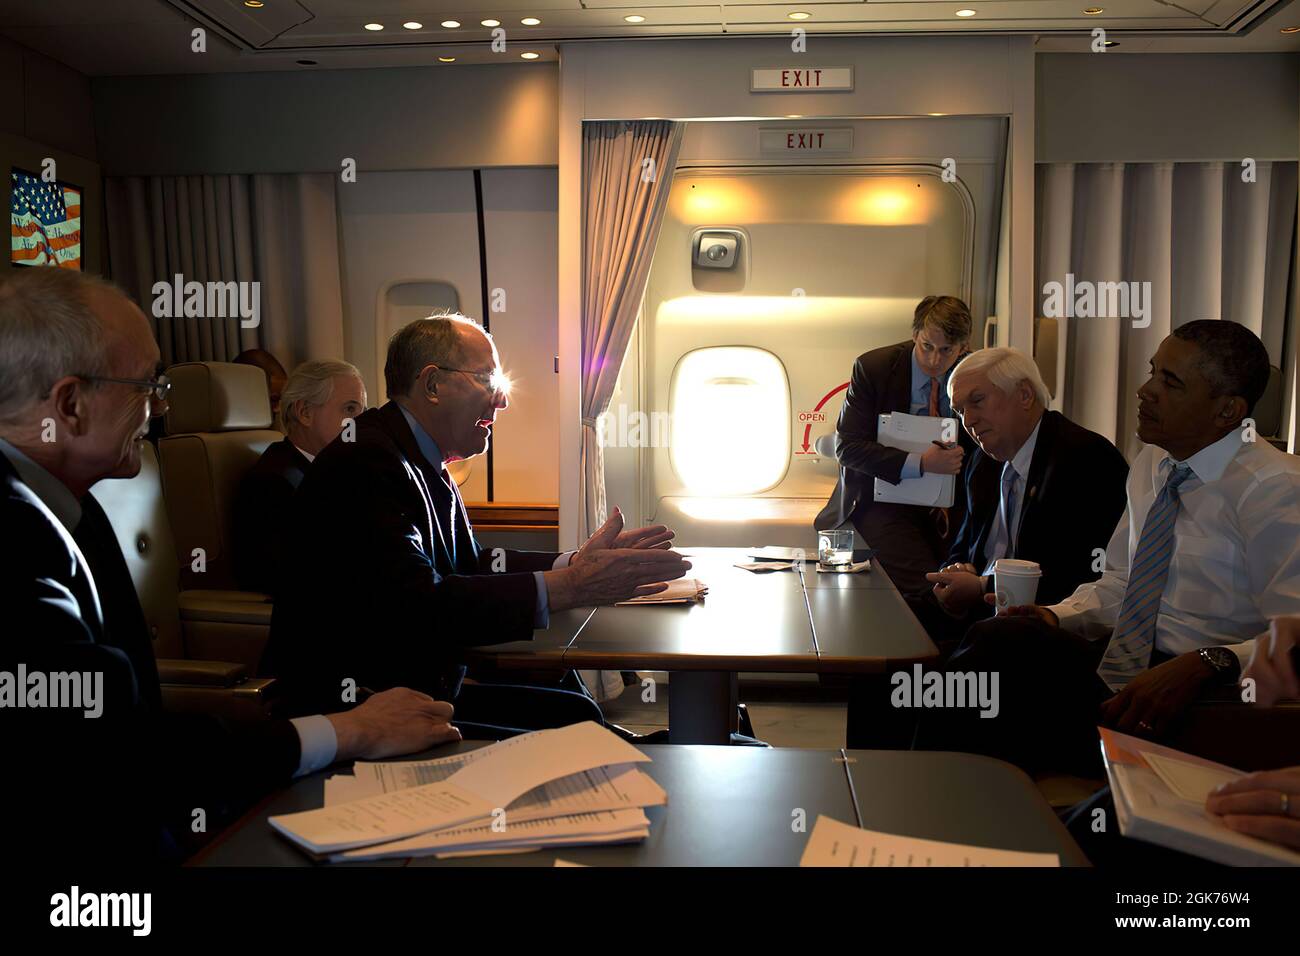 President Barack Obama listens to Sen. Lamar Alexander, R-Tenn. while meeting with a congressional delegation aboard Air Force One en route to Knoxville, Tenn., Jan. 9, 2015. Also attending, left to right, Ted Mitchell, Undersecretary of Education; Sen. Bob Corker, R-Tenn; James Kvaal, Deputy Director of the Domestic Policy Council and Rep. John 'Jimmy' Duncan, R-Tenn. (Official White House Photo by Pete Souza) This official White House photograph is being made available only for publication by news organizations and/or for personal use printing by the subject(s) of the photograph. The photogr Stock Photo